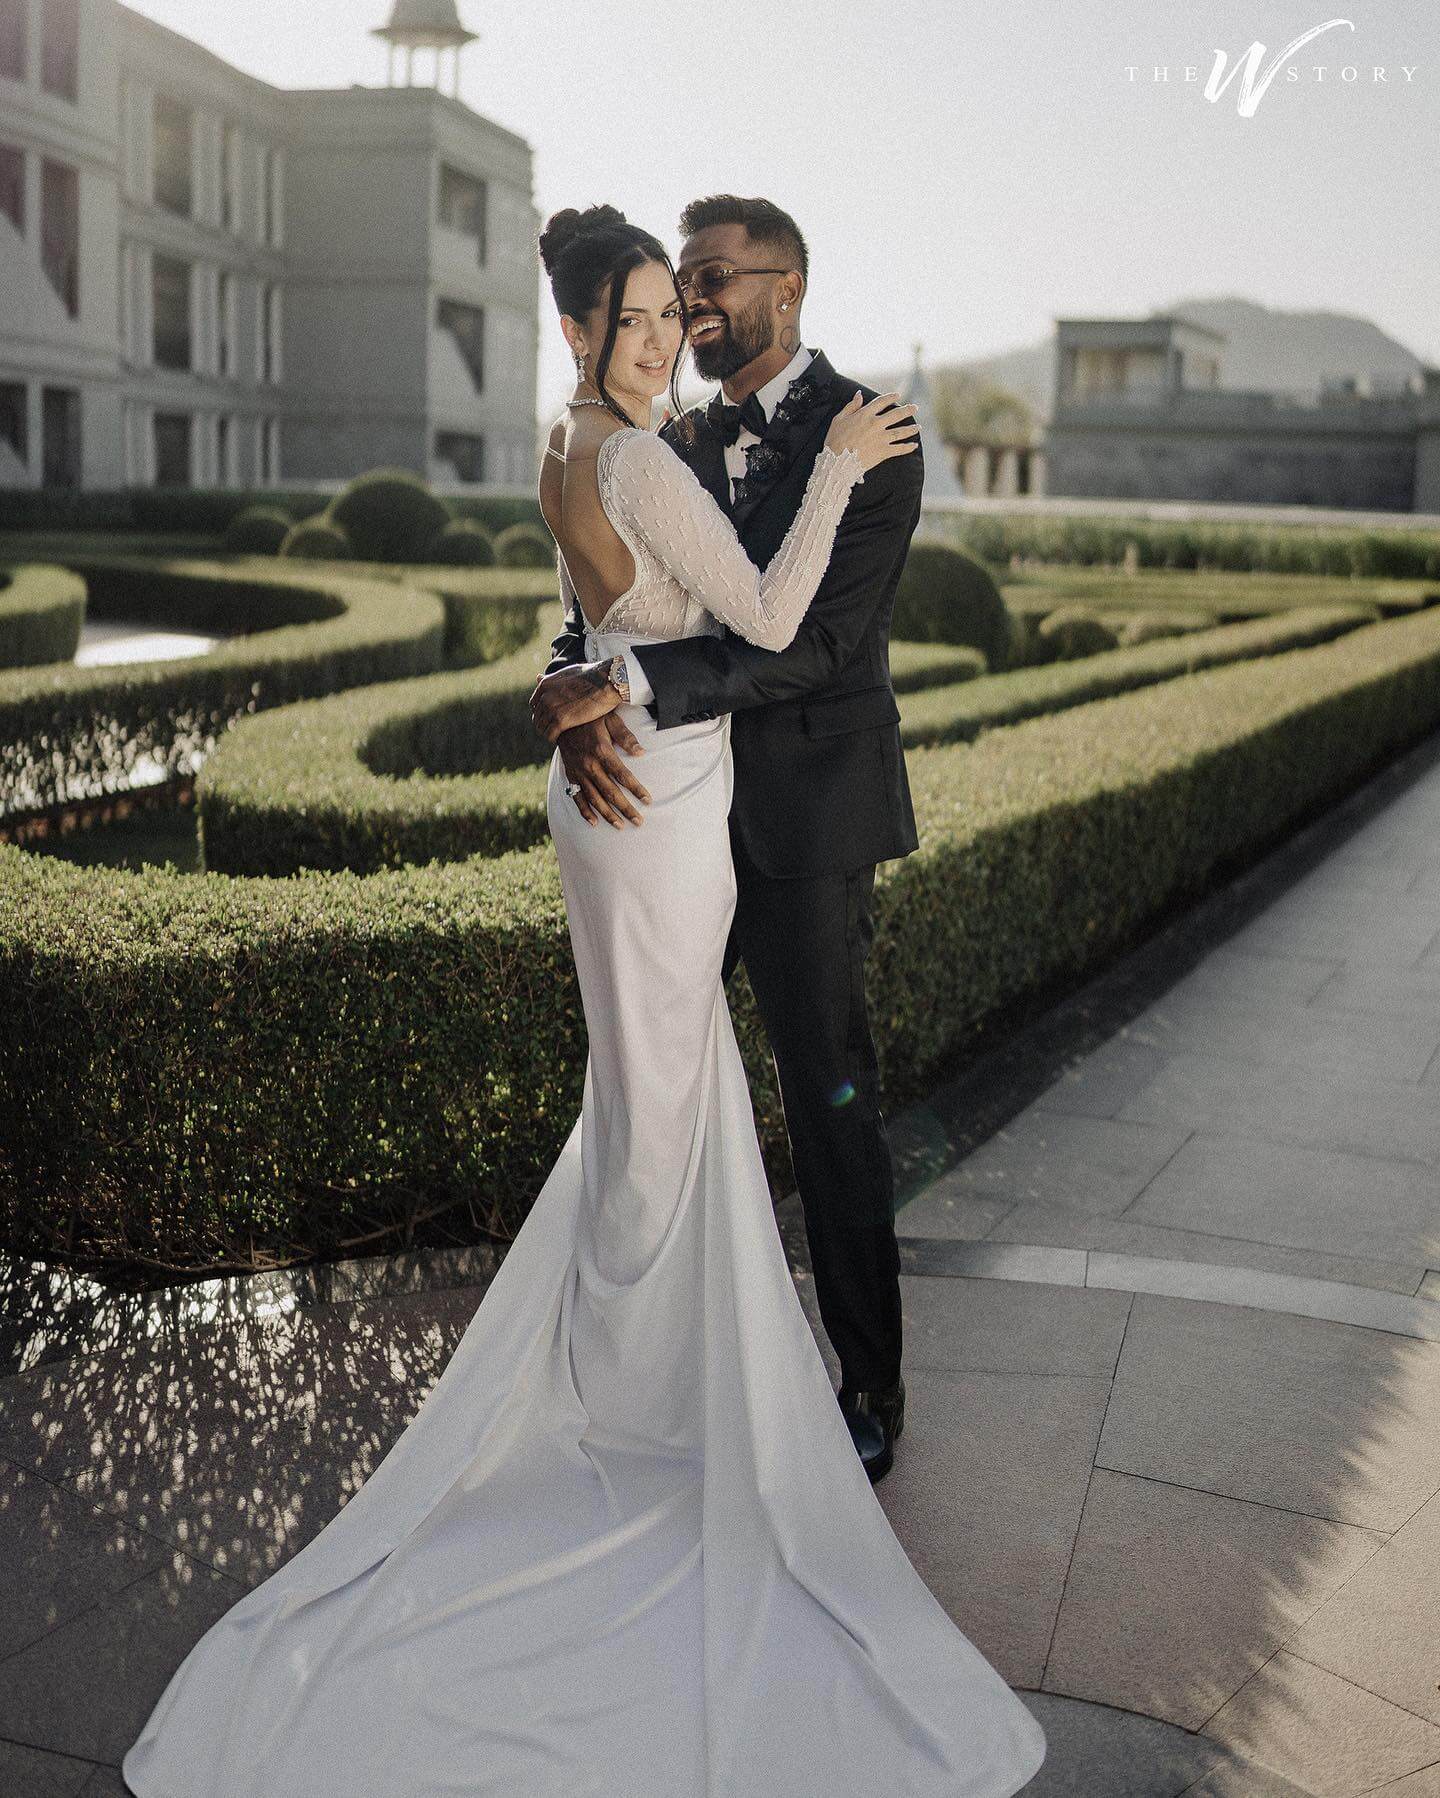 Hardik Pandya and Natasa Stankovic tied the knot again in a white wedding ceremony